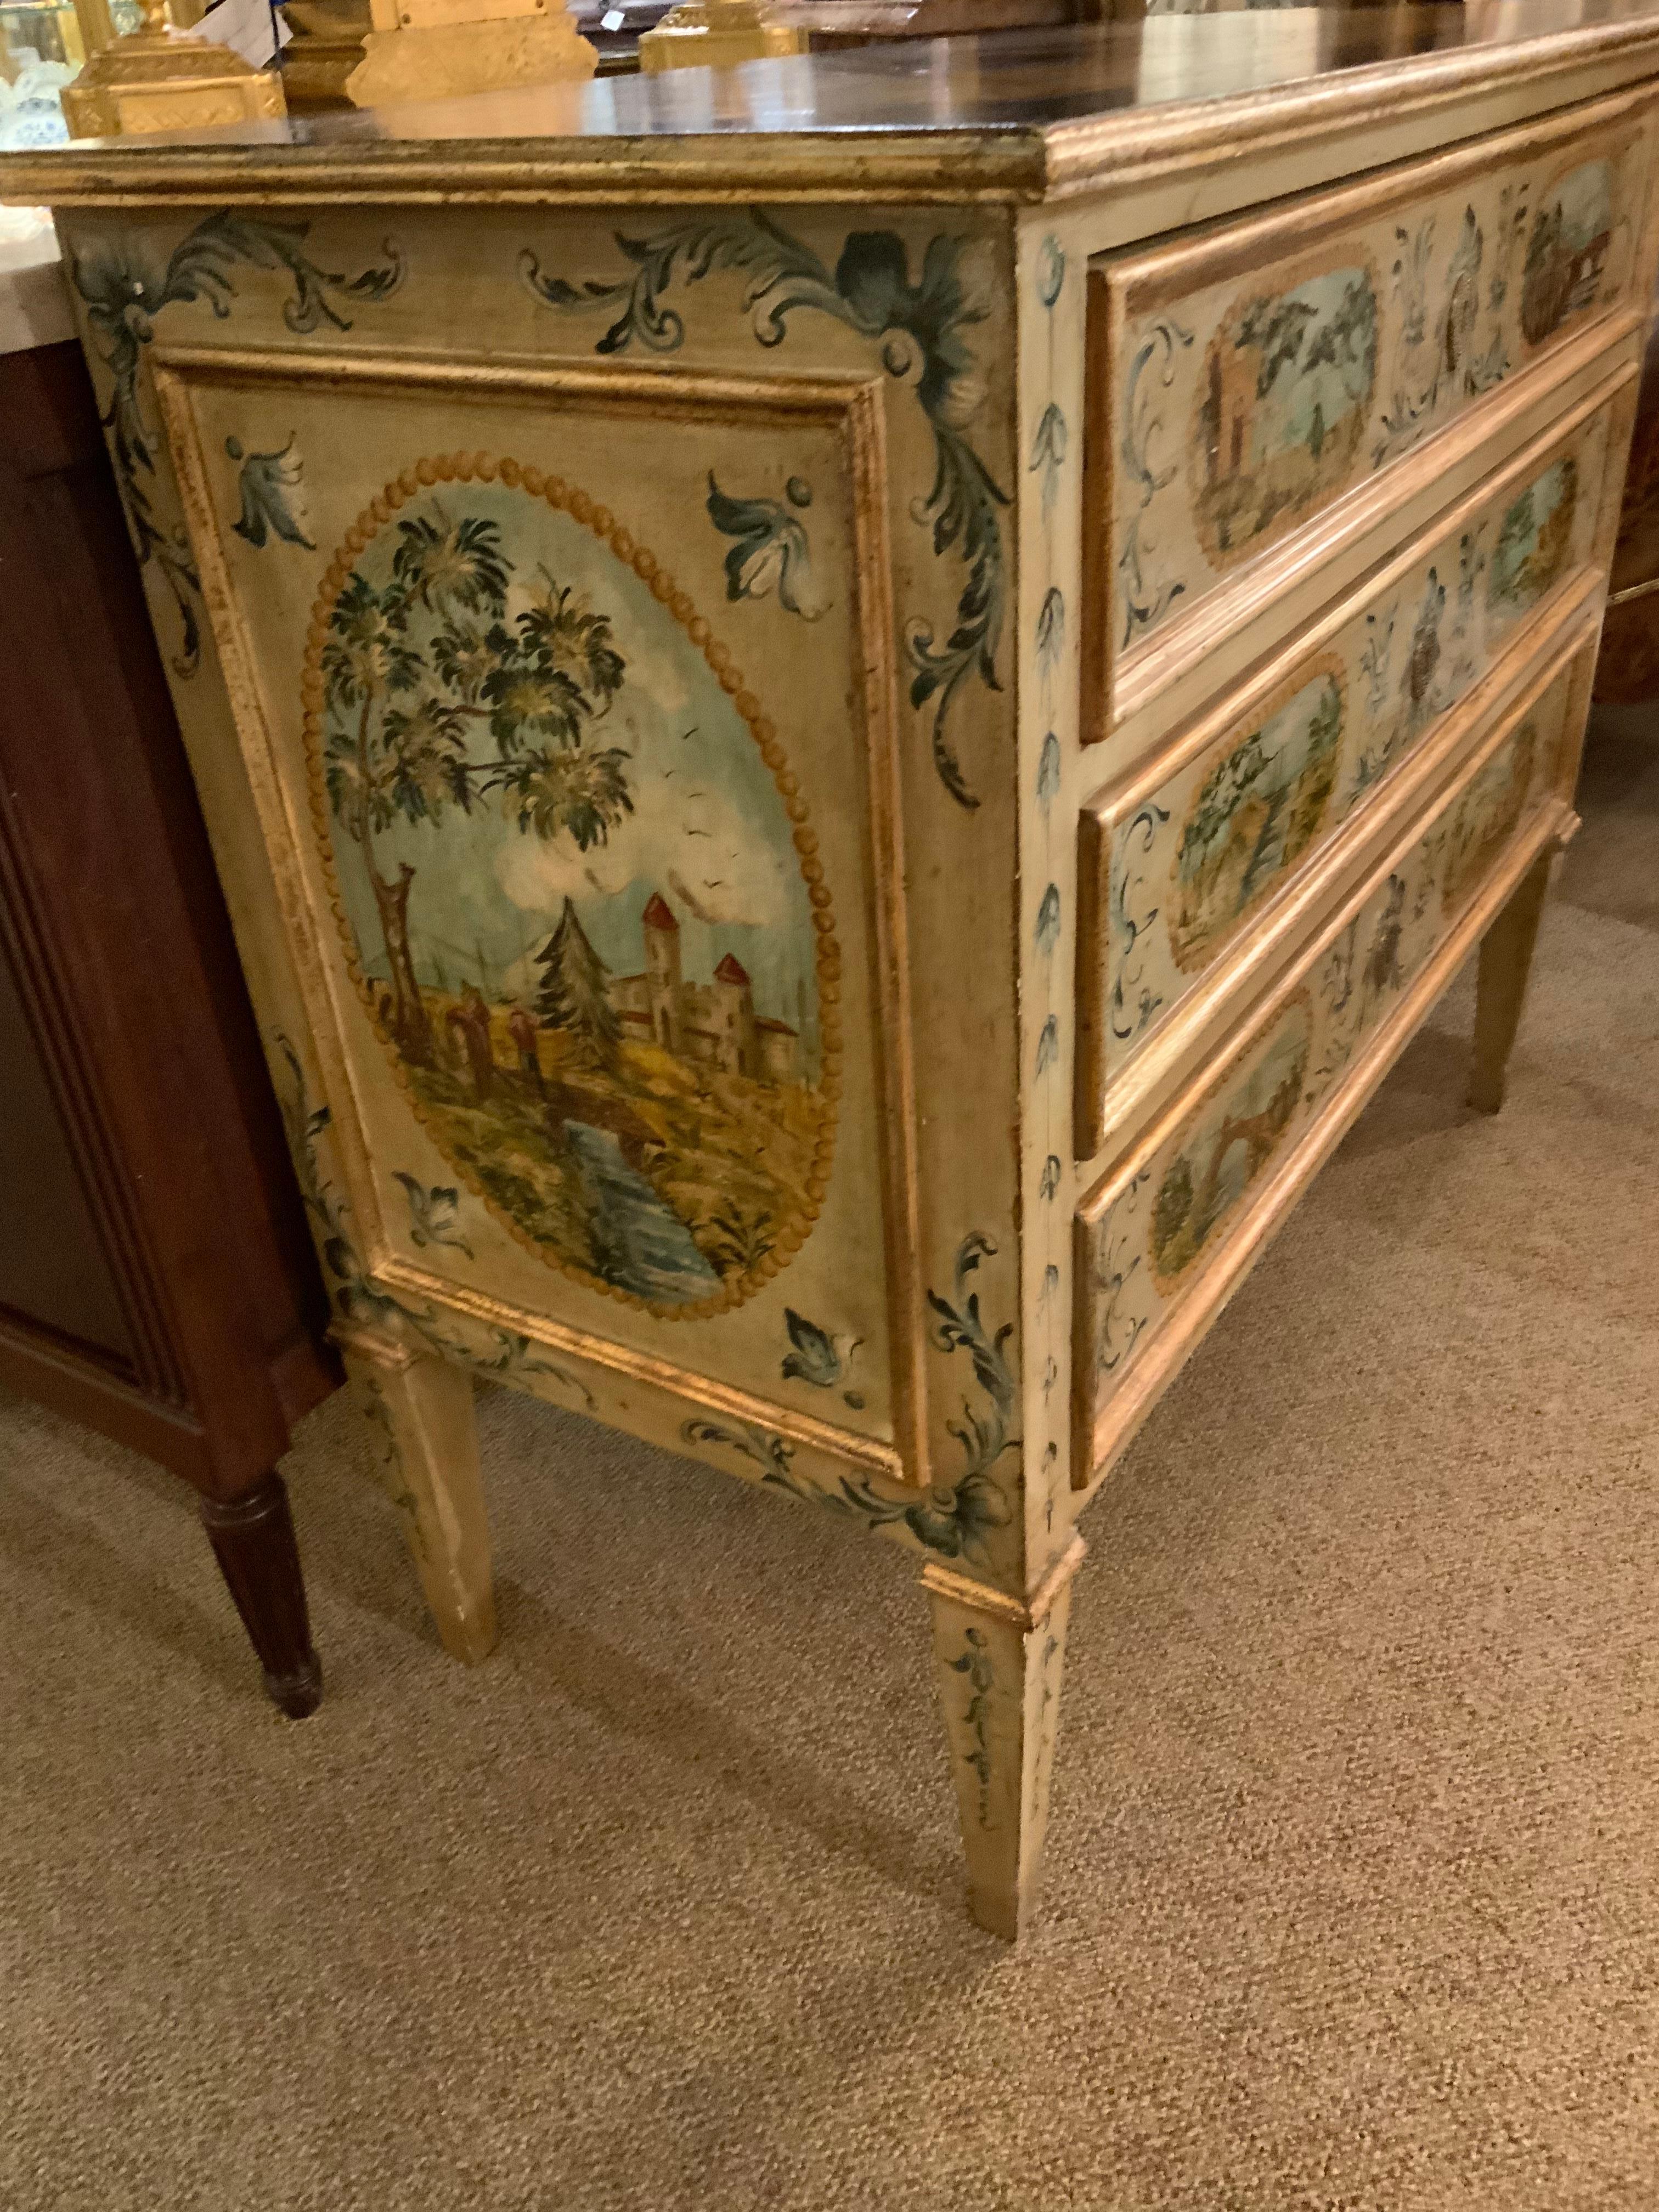 This piece is Venetian and is hand painted throughout 
With painted flowers, vines, genre scenes and faux
Marble, the case fitted with three drawers with molded
Perimeter edges and tapering legs. The case hue is a
Pale creamy yellow and the